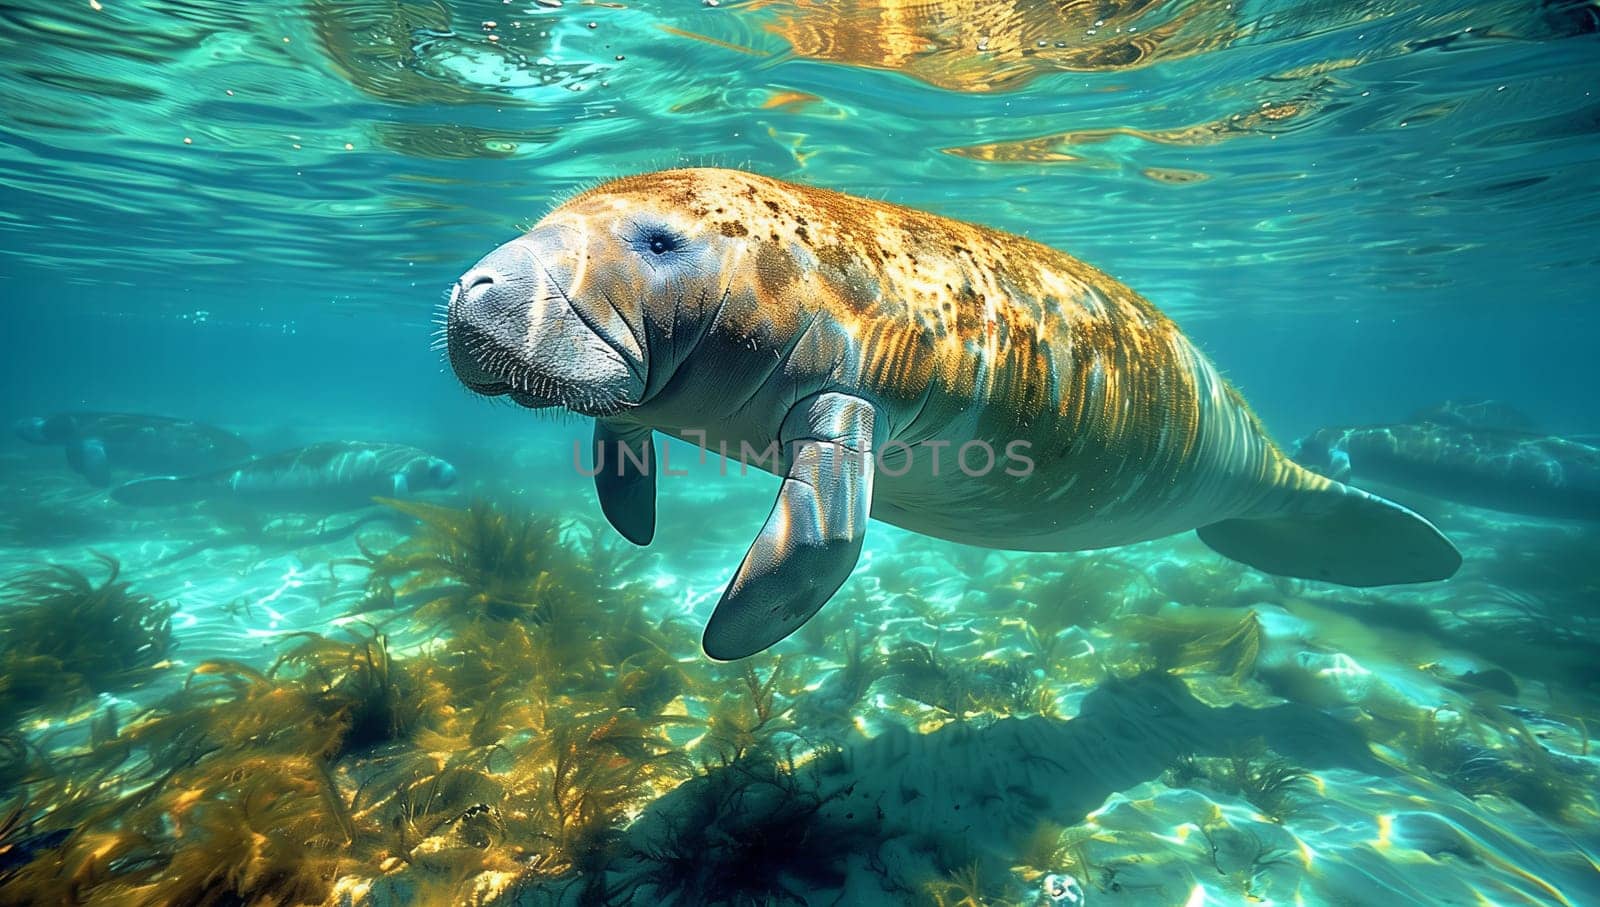 A marine mammal known as a manatee gracefully swims underwater in the fluid waters of the ocean near a vibrant coral reef